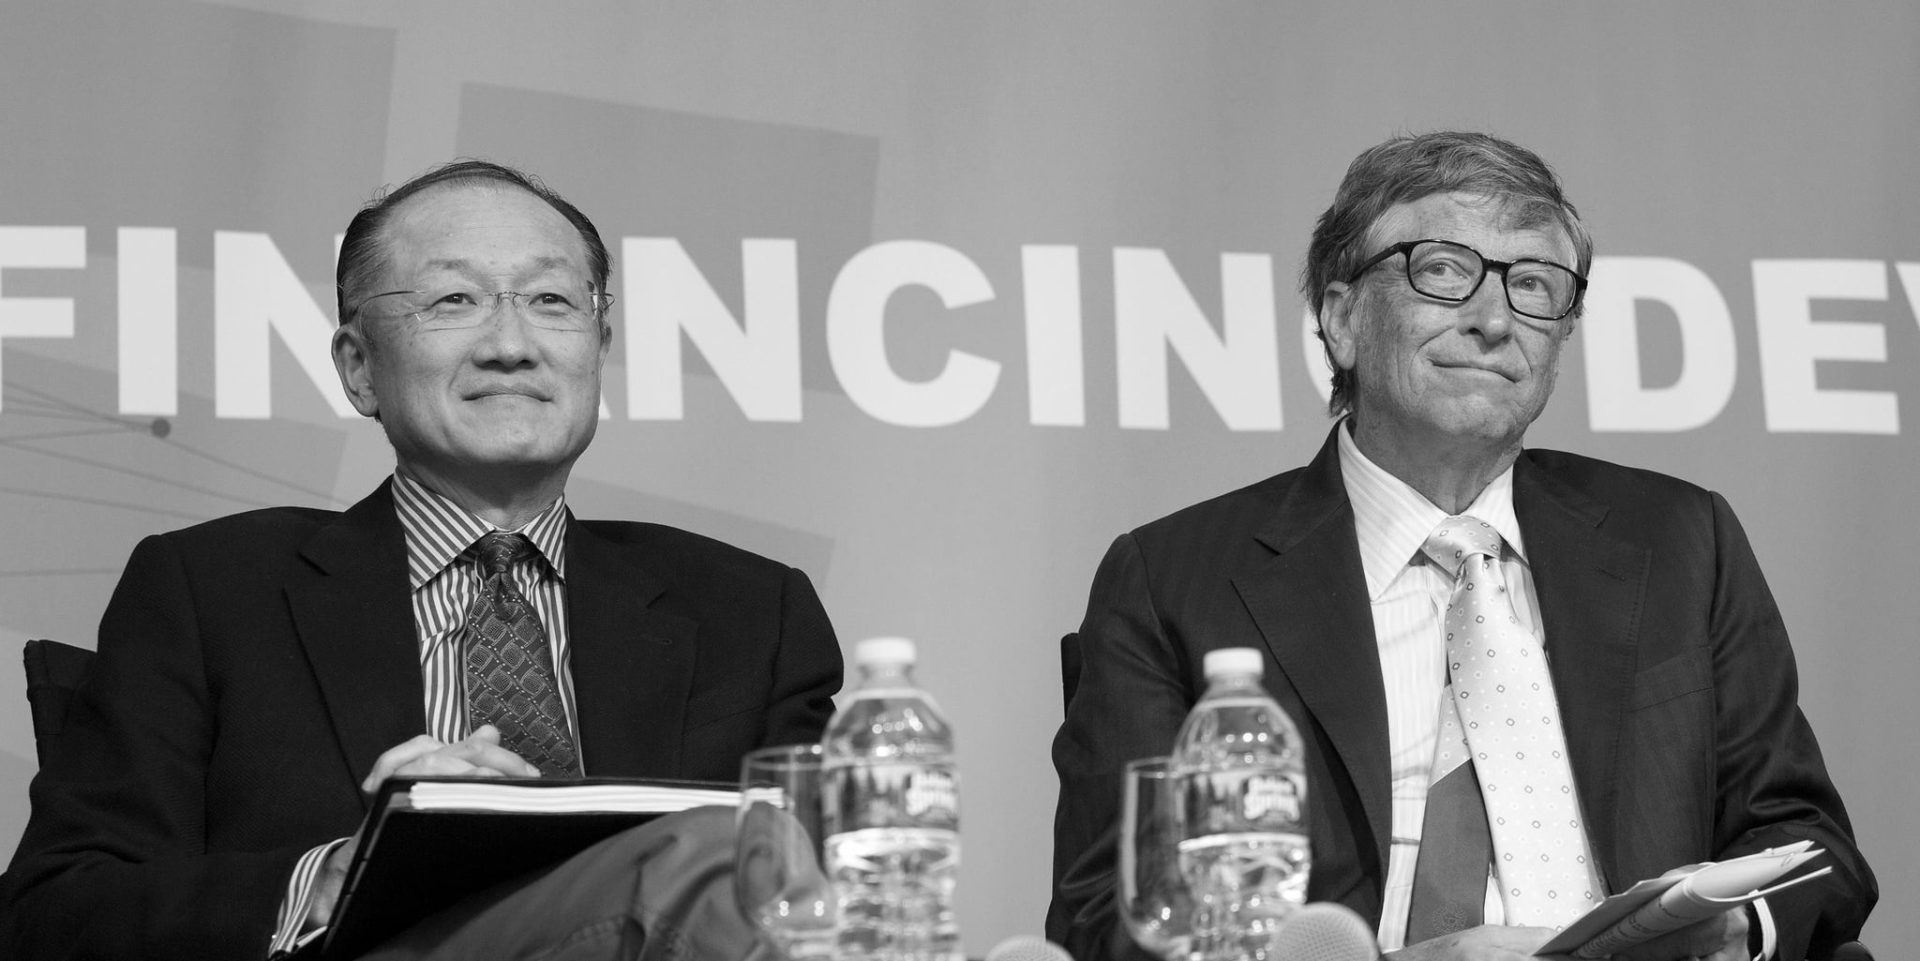 Former World Bank President Jim Yong Kim sitting next to Bill Gates, the two of them are smiling